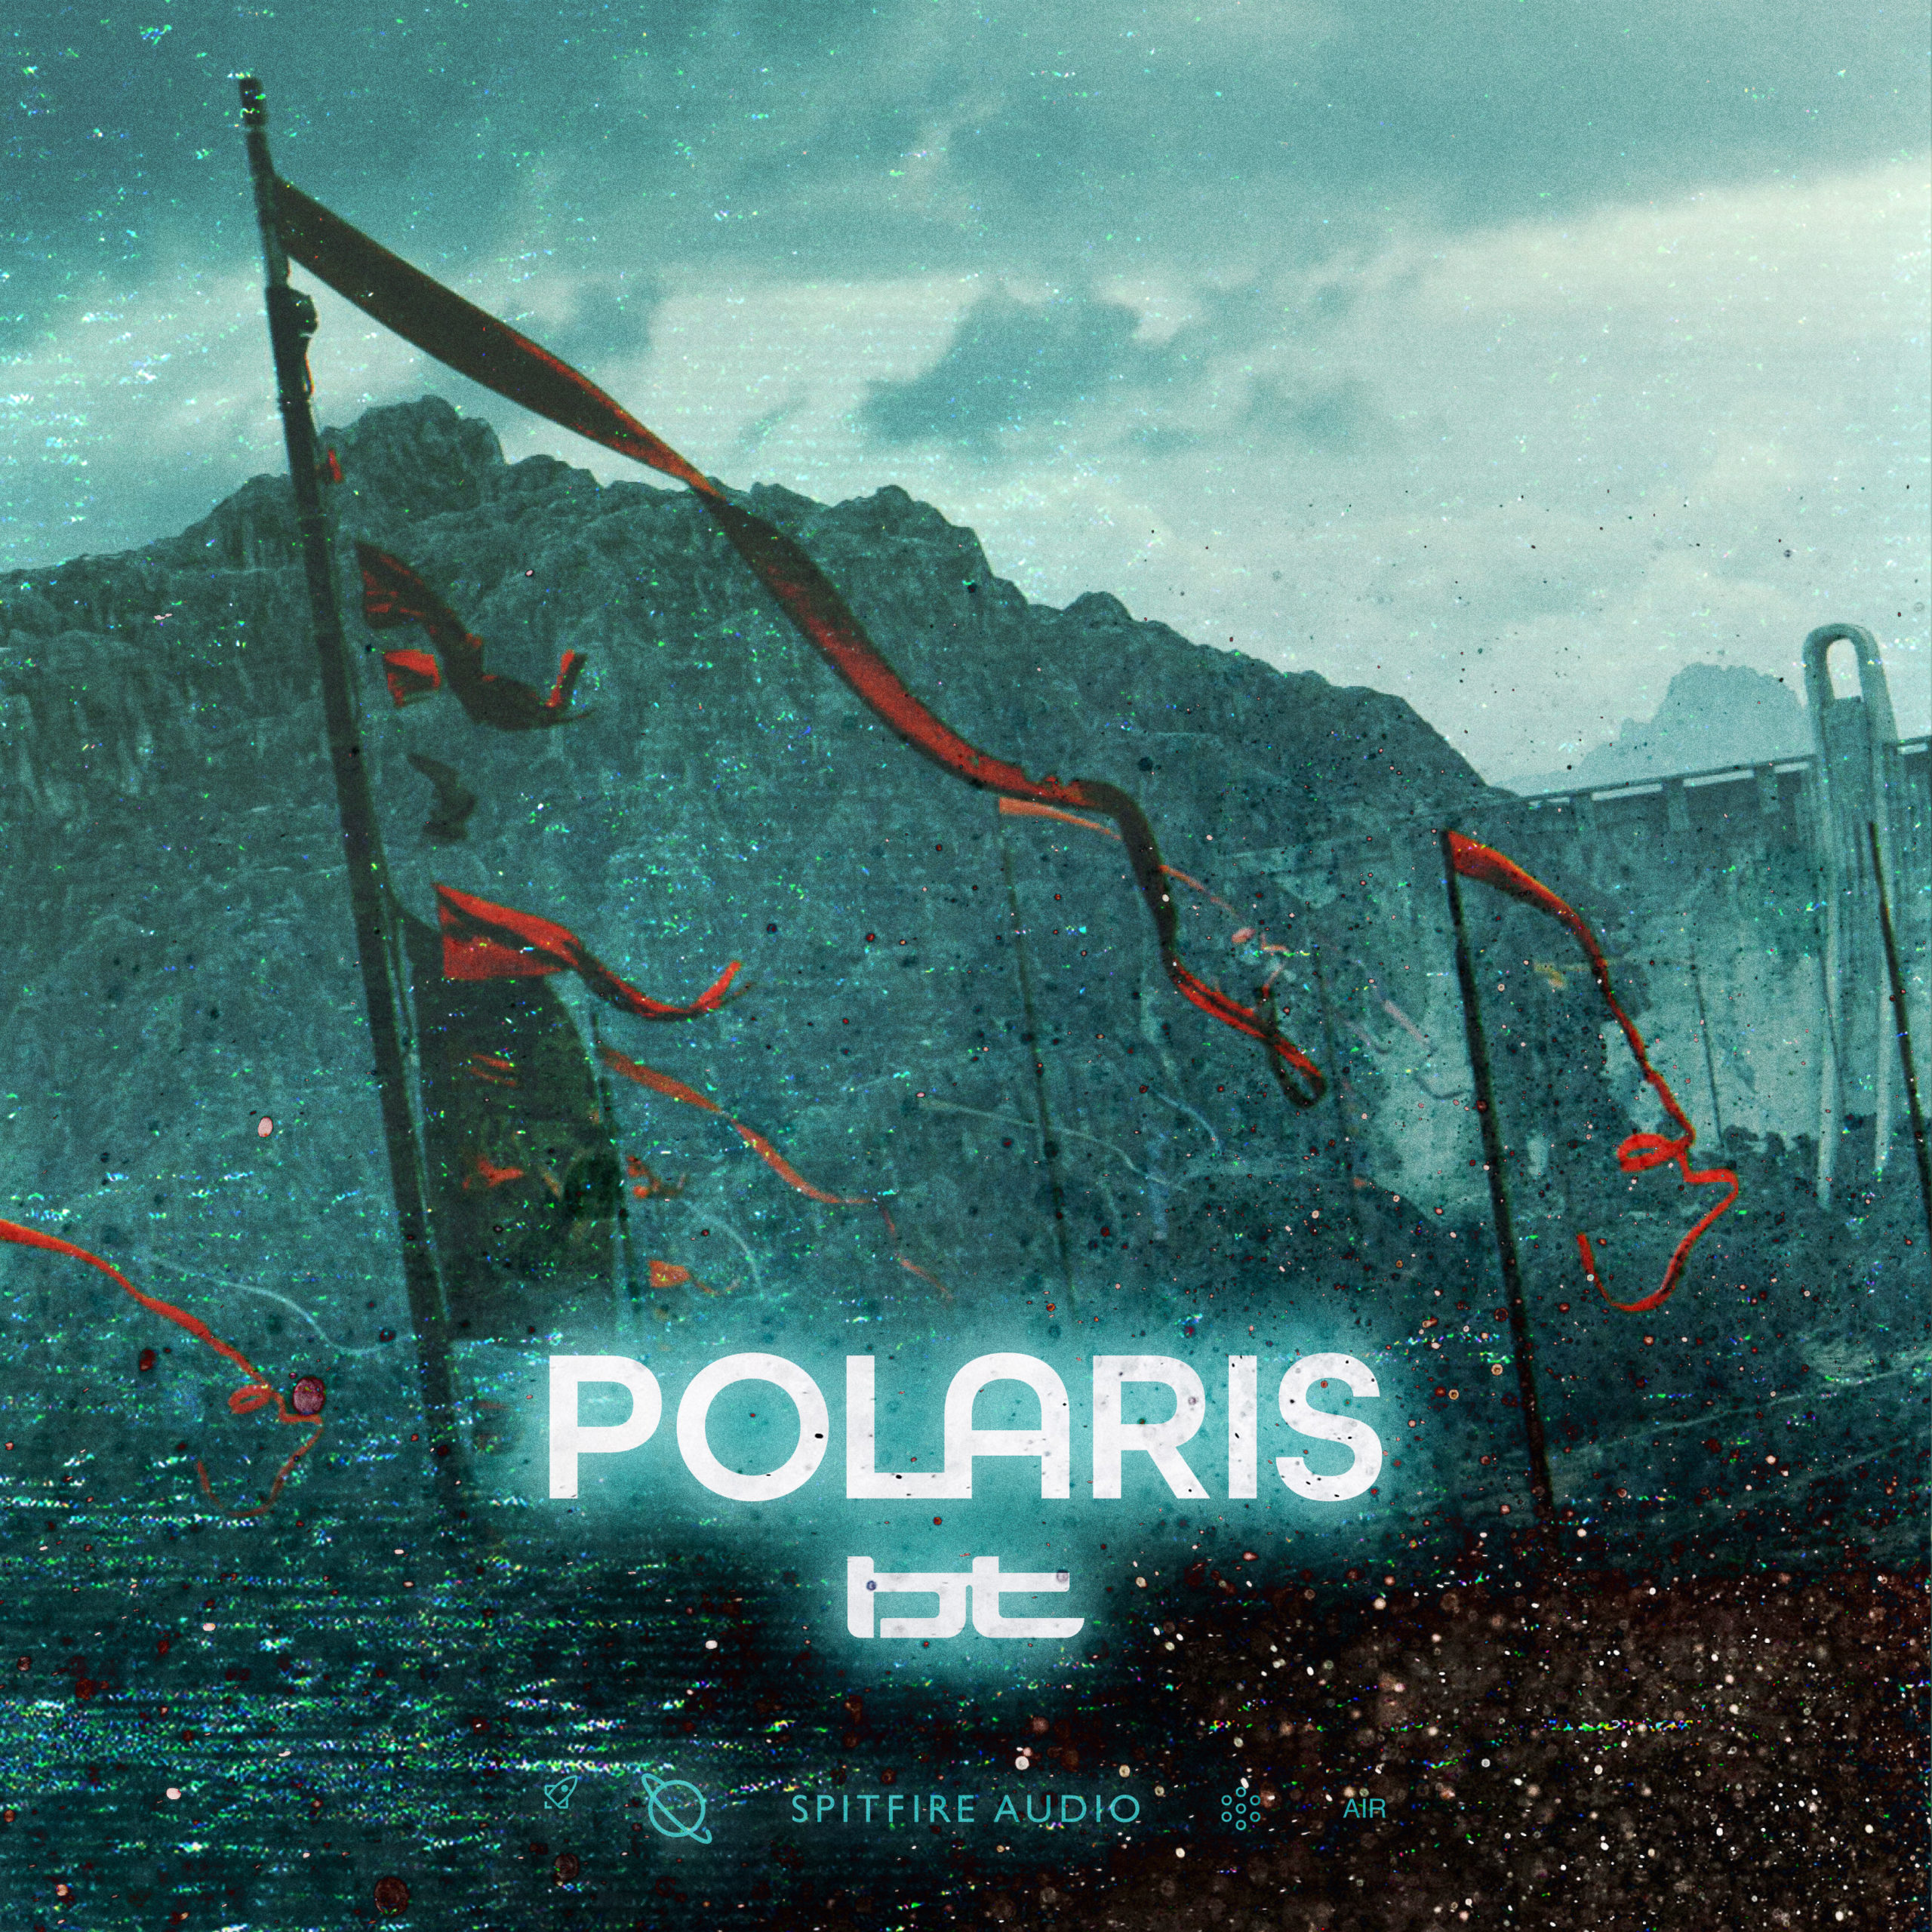 Polaris Review: A Modern String Orchestra Imitating Classic Synth Sounds